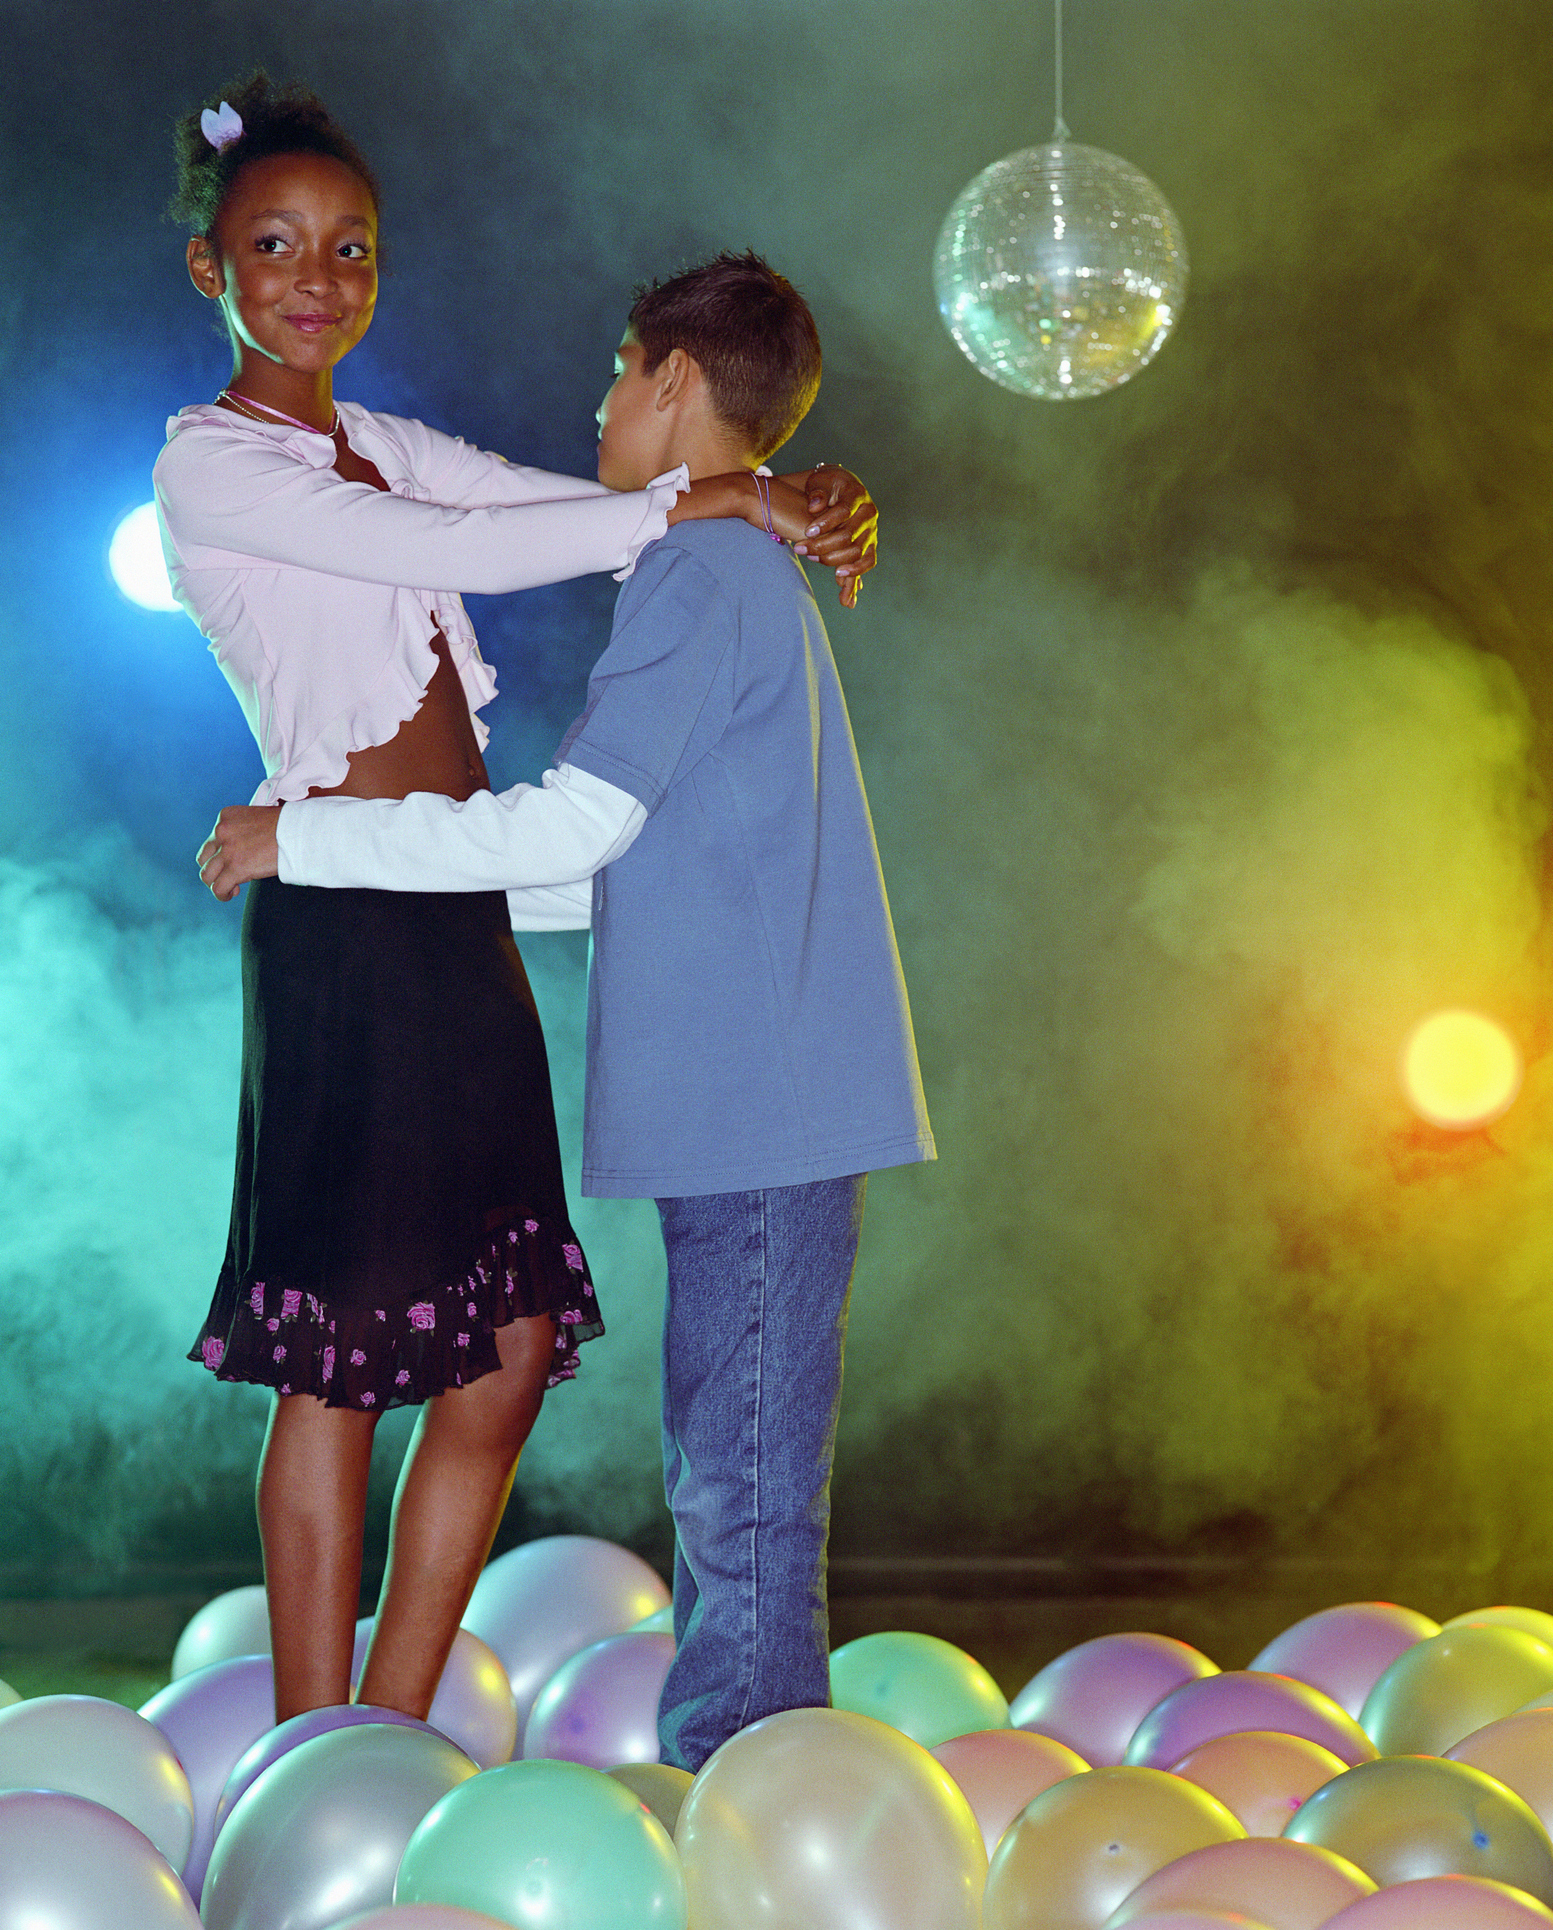 Two children dancing together at a party with a disco ball overhead and balloons on the floor